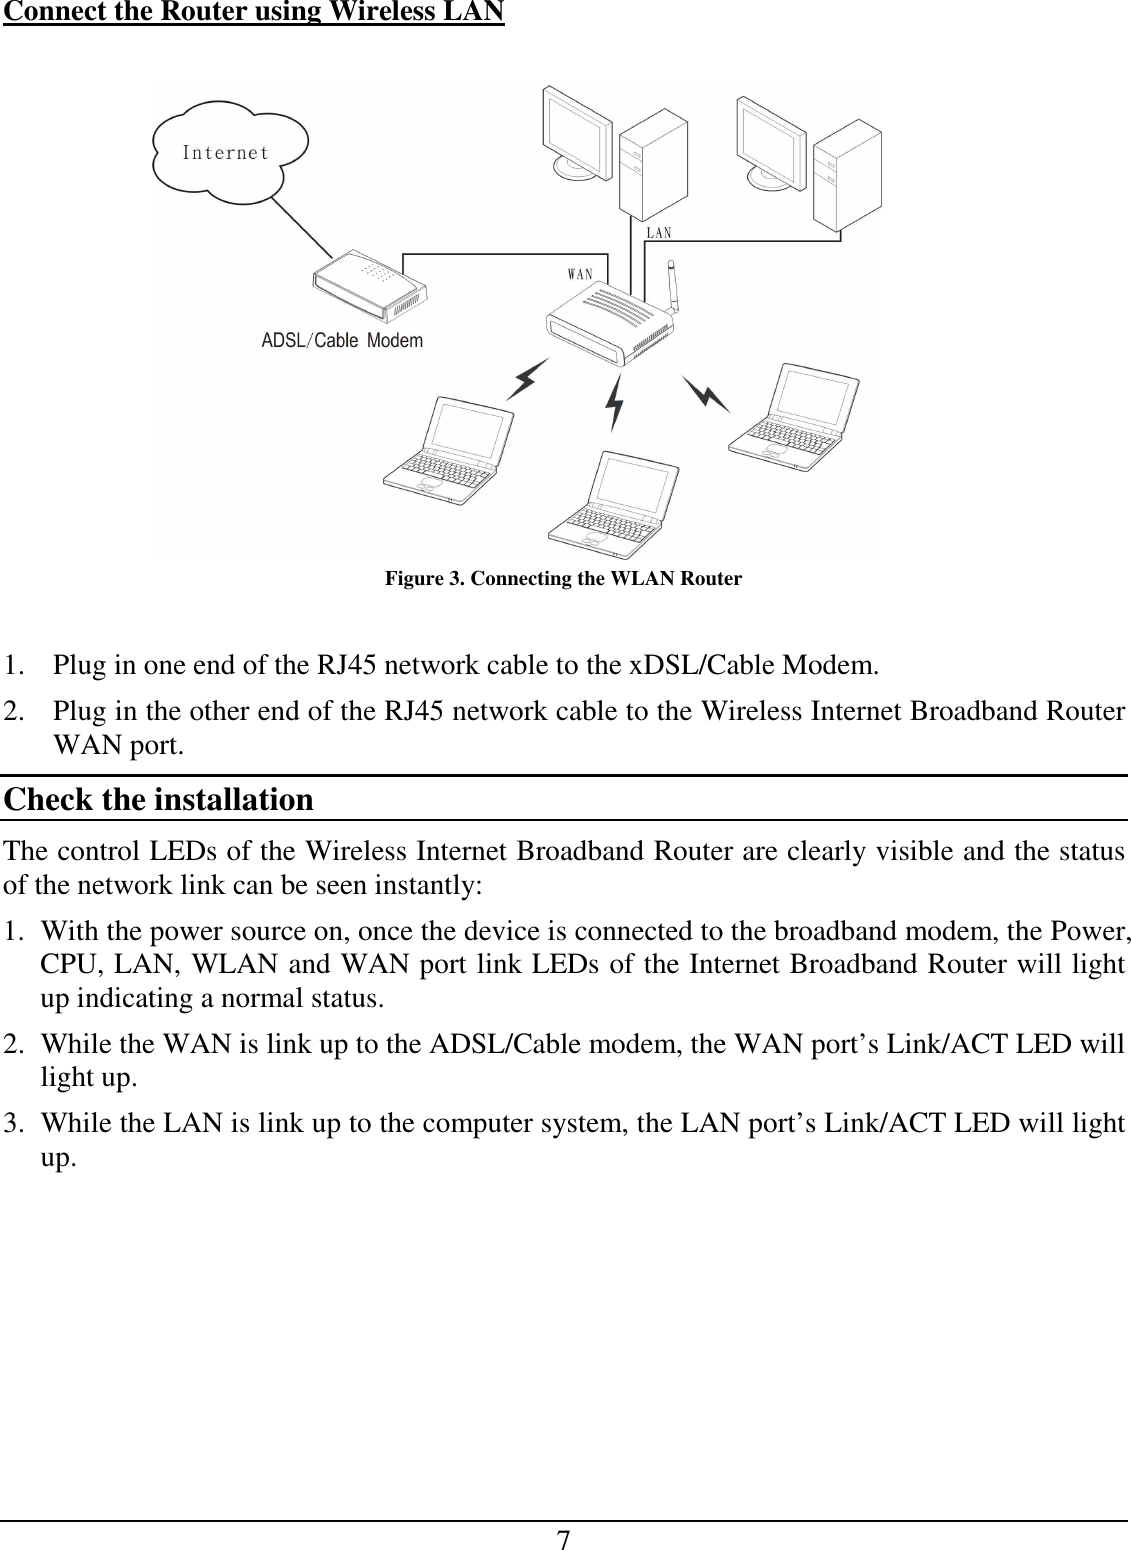 7 Connect the Router using Wireless LAN   Figure 3. Connecting the WLAN Router  1. Plug in one end of the RJ45 network cable to the xDSL/Cable Modem. 2. Plug in the other end of the RJ45 network cable to the Wireless Internet Broadband Router WAN port. Check the installation The control LEDs of the Wireless Internet Broadband Router are clearly visible and the status of the network link can be seen instantly: 1. With the power source on, once the device is connected to the broadband modem, the Power, CPU, LAN, WLAN and WAN port link LEDs of the Internet Broadband Router will light up indicating a normal status. 2. While the WAN is link up to the ADSL/Cable modem, the WAN port’s Link/ACT LED will light up. 3. While the LAN is link up to the computer system, the LAN port’s Link/ACT LED will light up.  